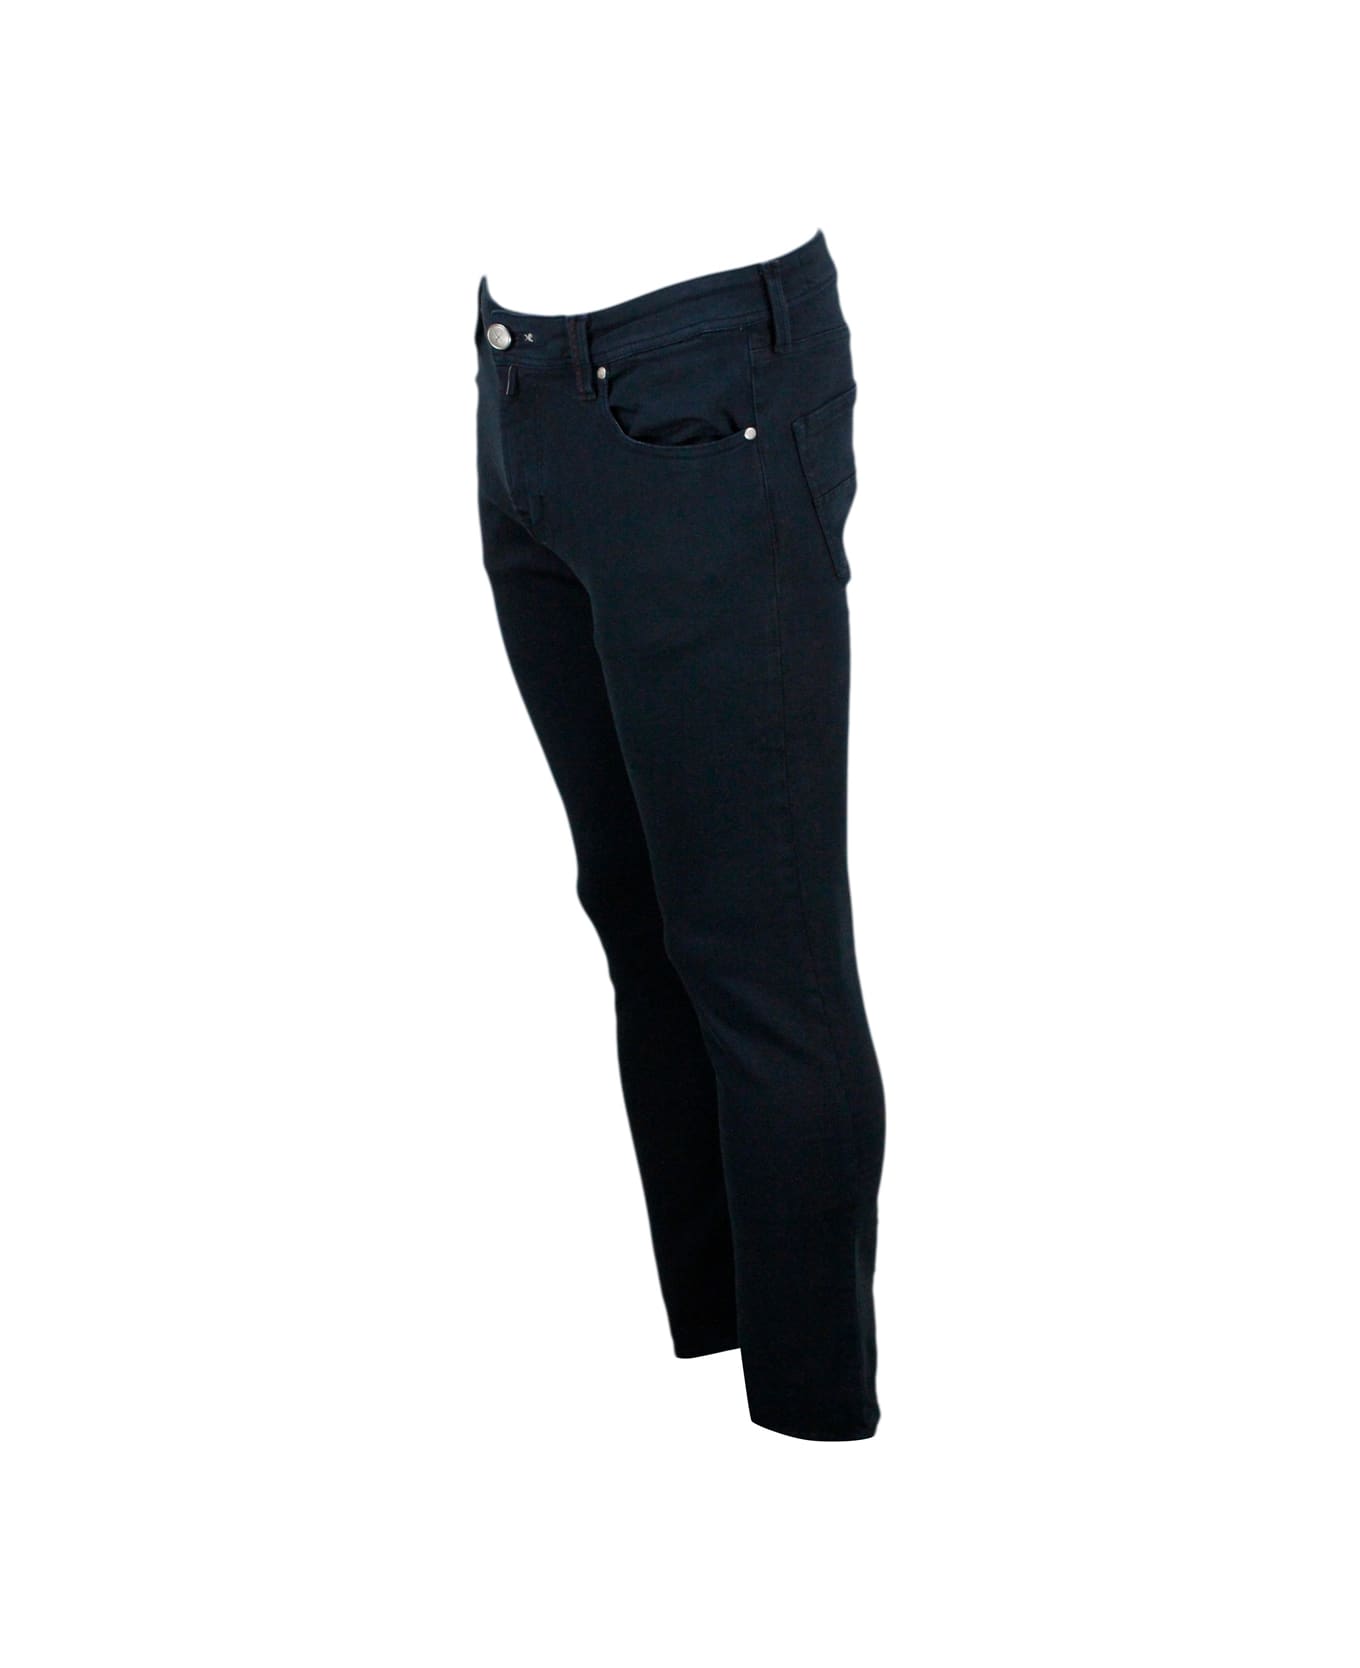 Sartoria Tramarossa Leonardo Zip Trousers In Super Stretch Cotton With 5 Pockets With Tone-on-tone Tailored Stitching And Leather Tab Closure With Zip - Black デニム